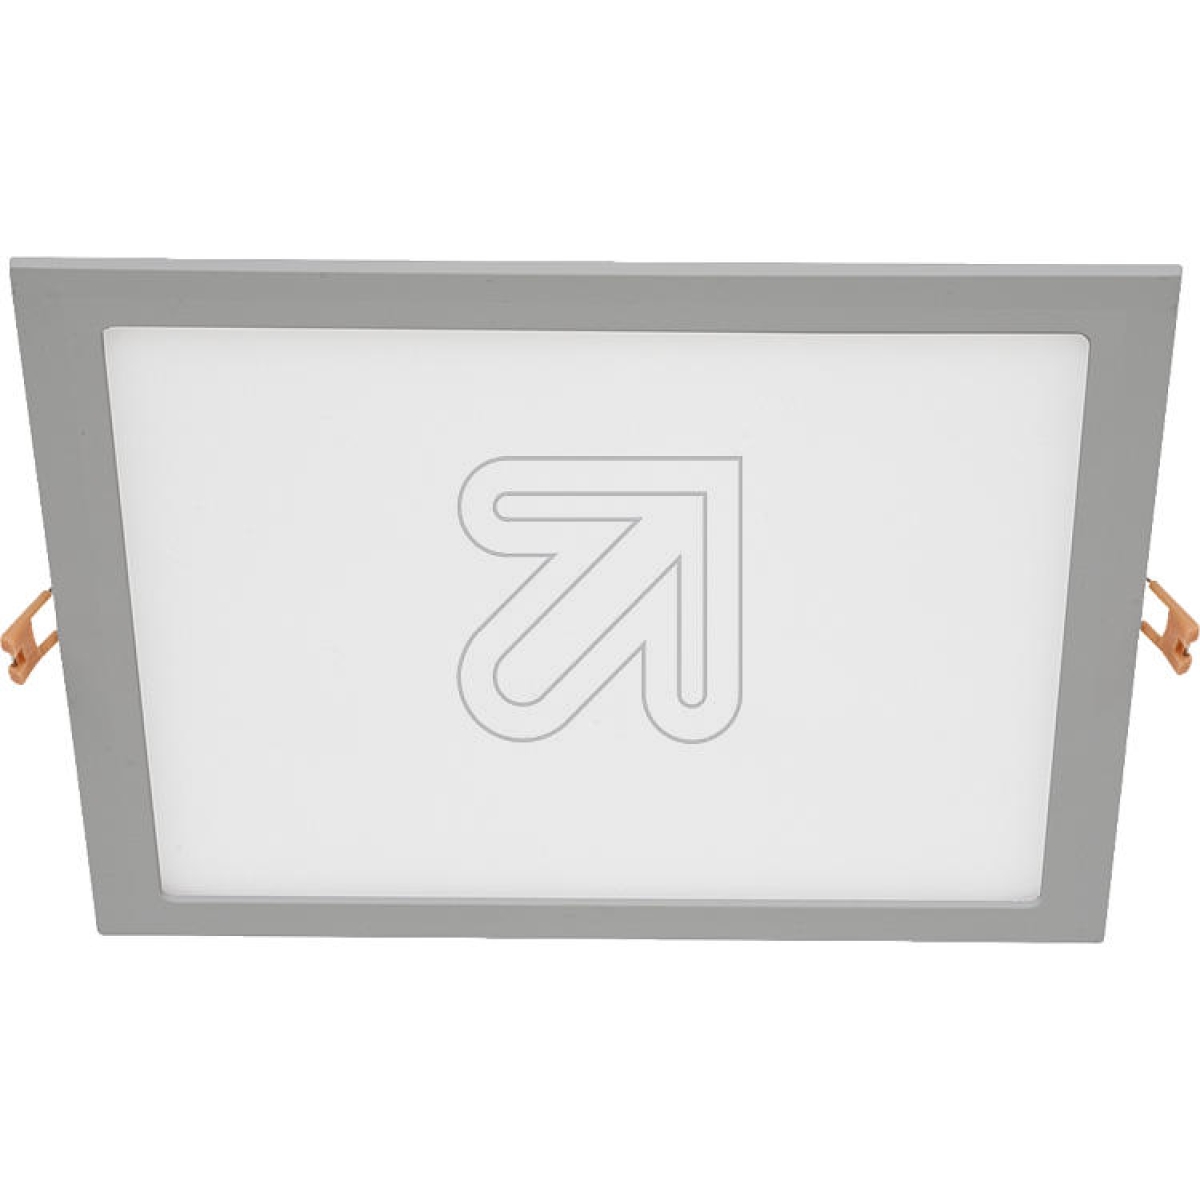 EVNLED recessed light 27W 4000K, silver, square 350mA, beam angle 120°, dimmable, LPQ303540Article-No: 629475